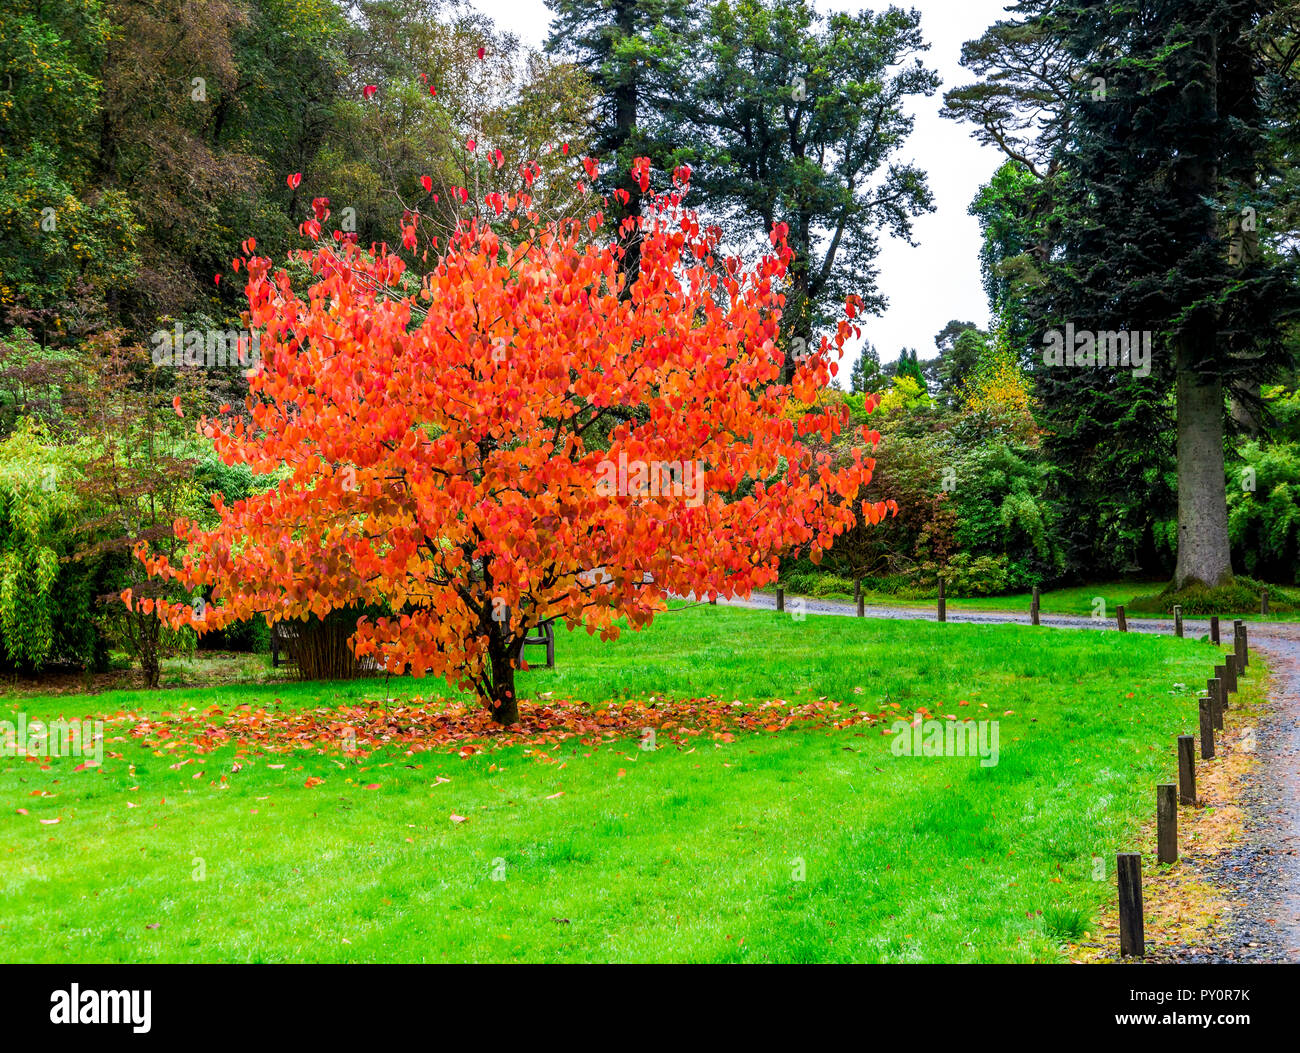 A beautiful tree (Davidia Involucrata) from South-West China with falling colourful red and orange leaves during autumn season in Benmore Botanic Gard Stock Photo